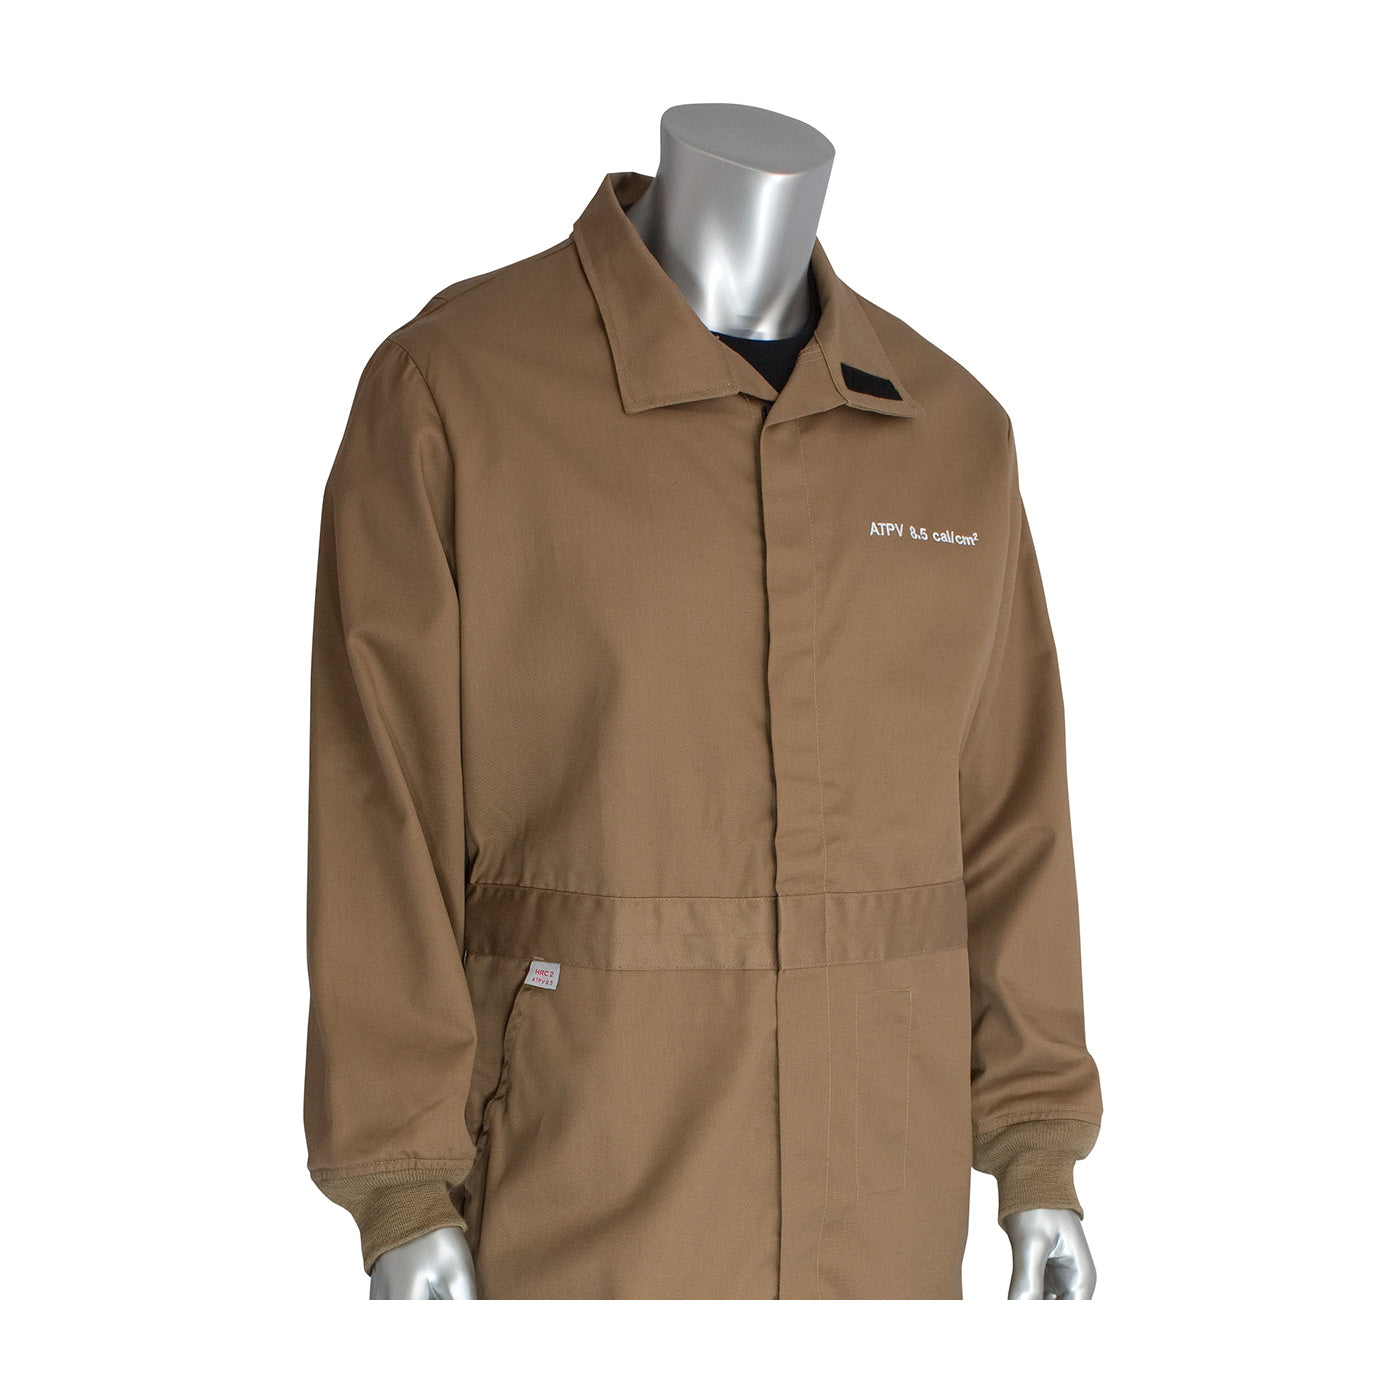 PIP 9100-2110D/L AR/FR Dual Certified Coverall with Insect Repellant - 8 Cal/cm2